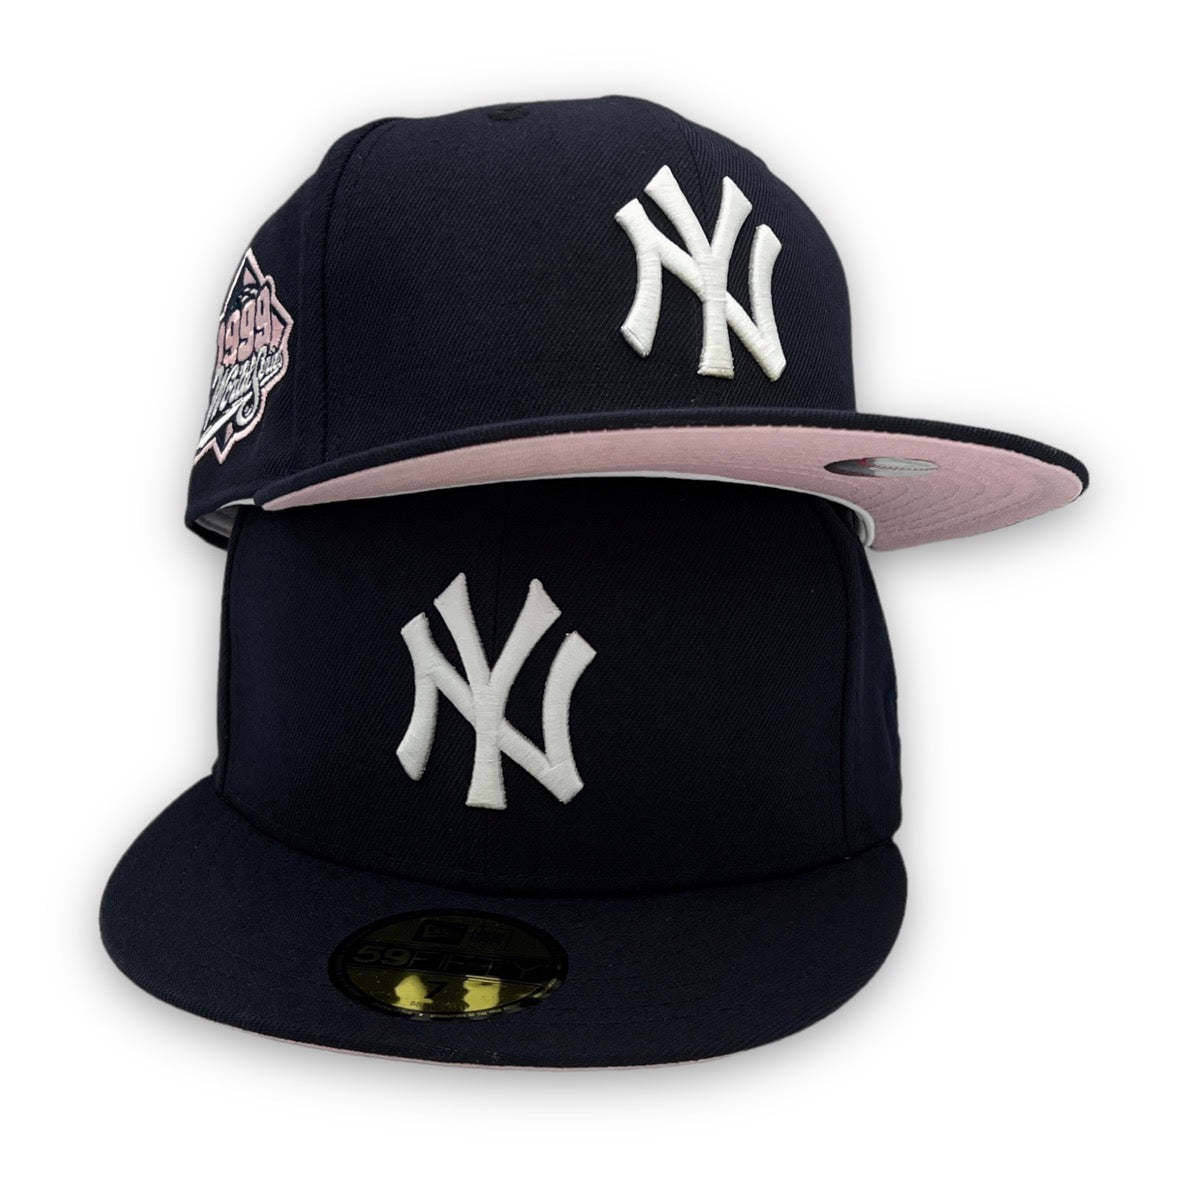 Yankees Pink Fitted Bottom WS Navy CAP Era Hat 59FIFTY York New New USA – 99 KING